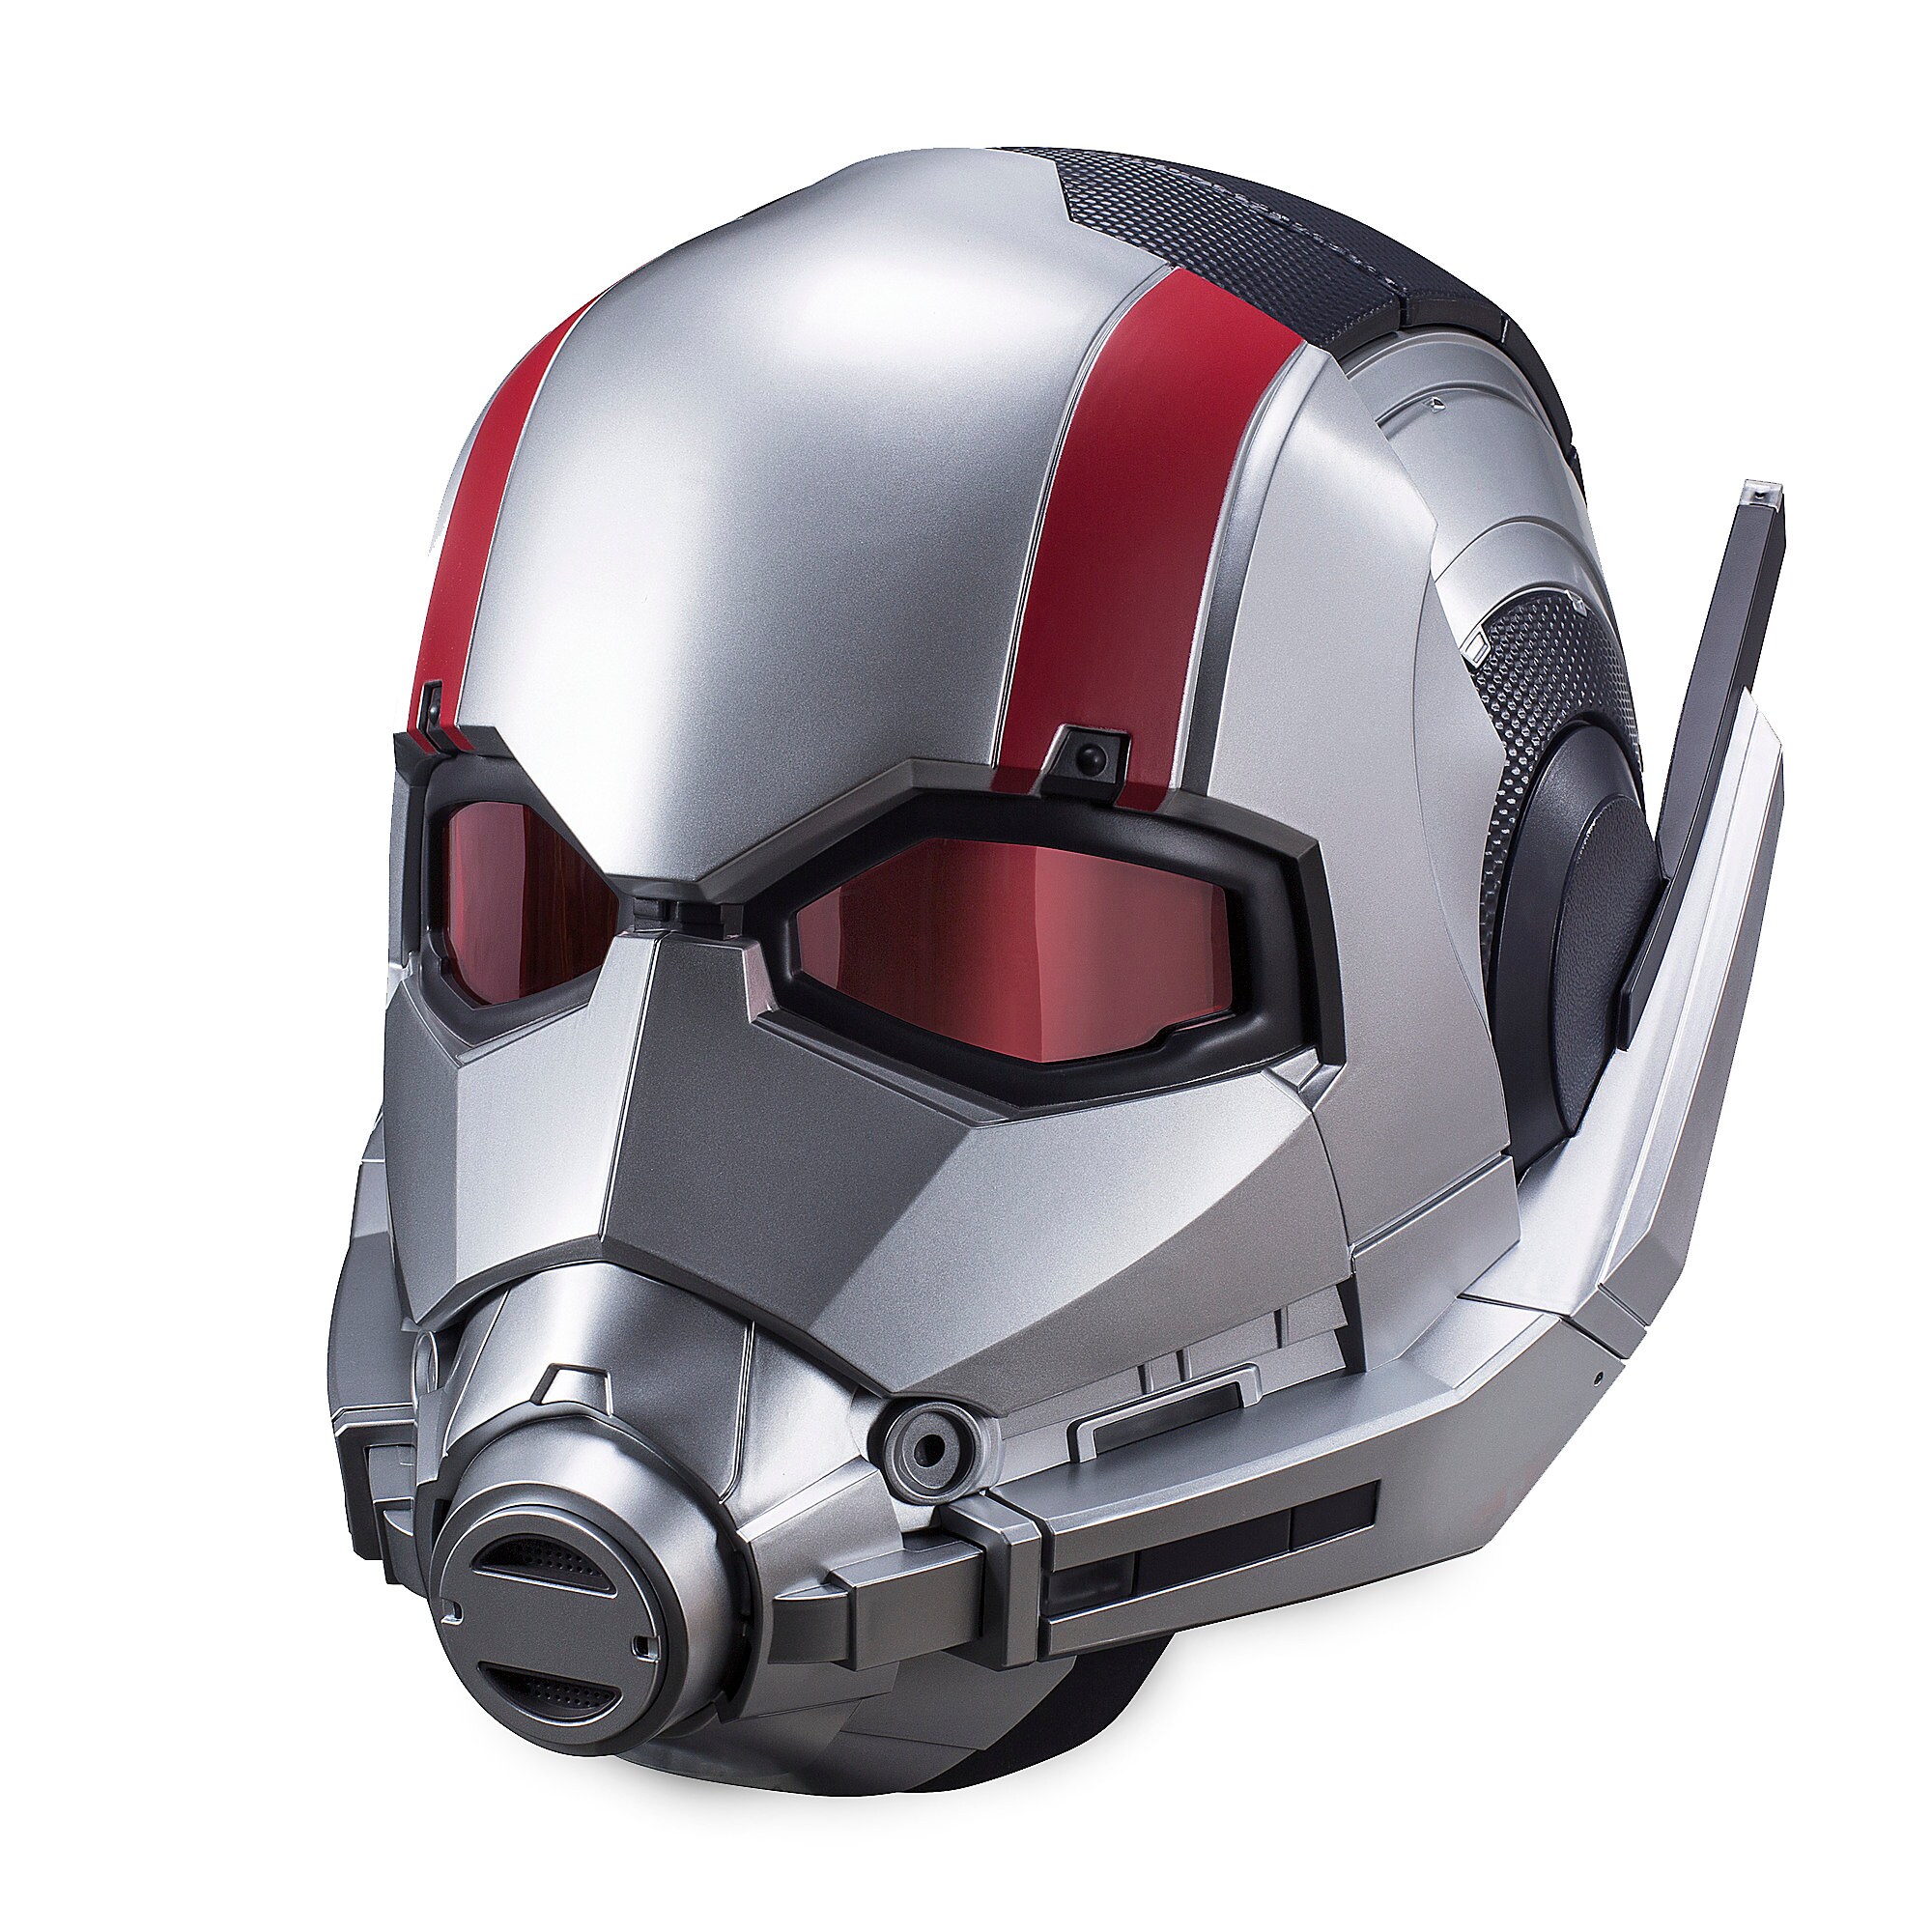 Ant-Man Electronic Helmet - Legends Series is available online for